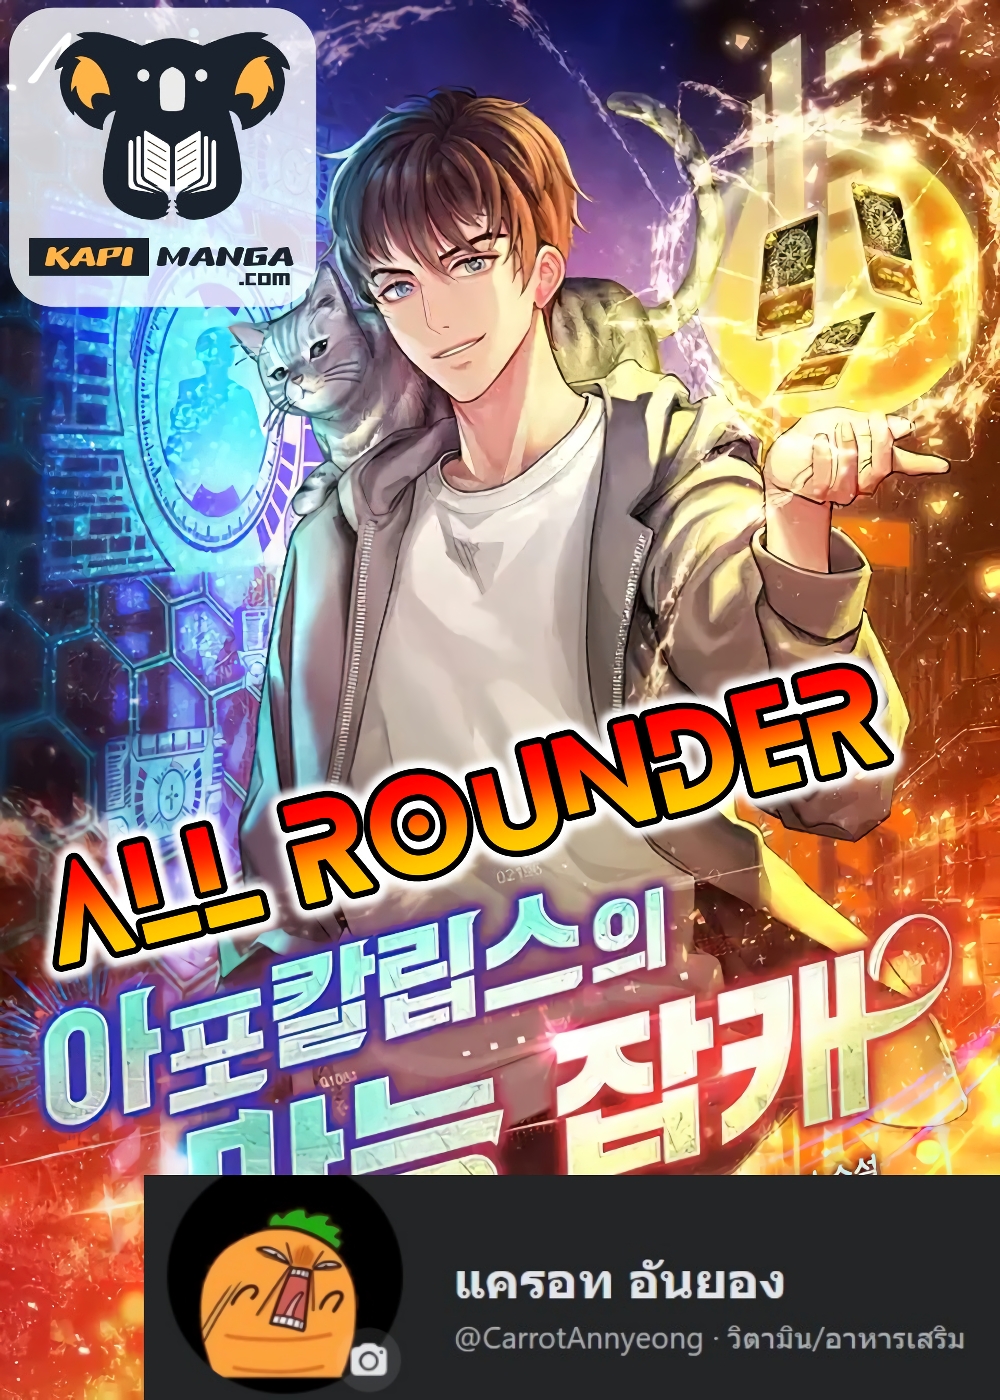 All Rounder 6 (1)